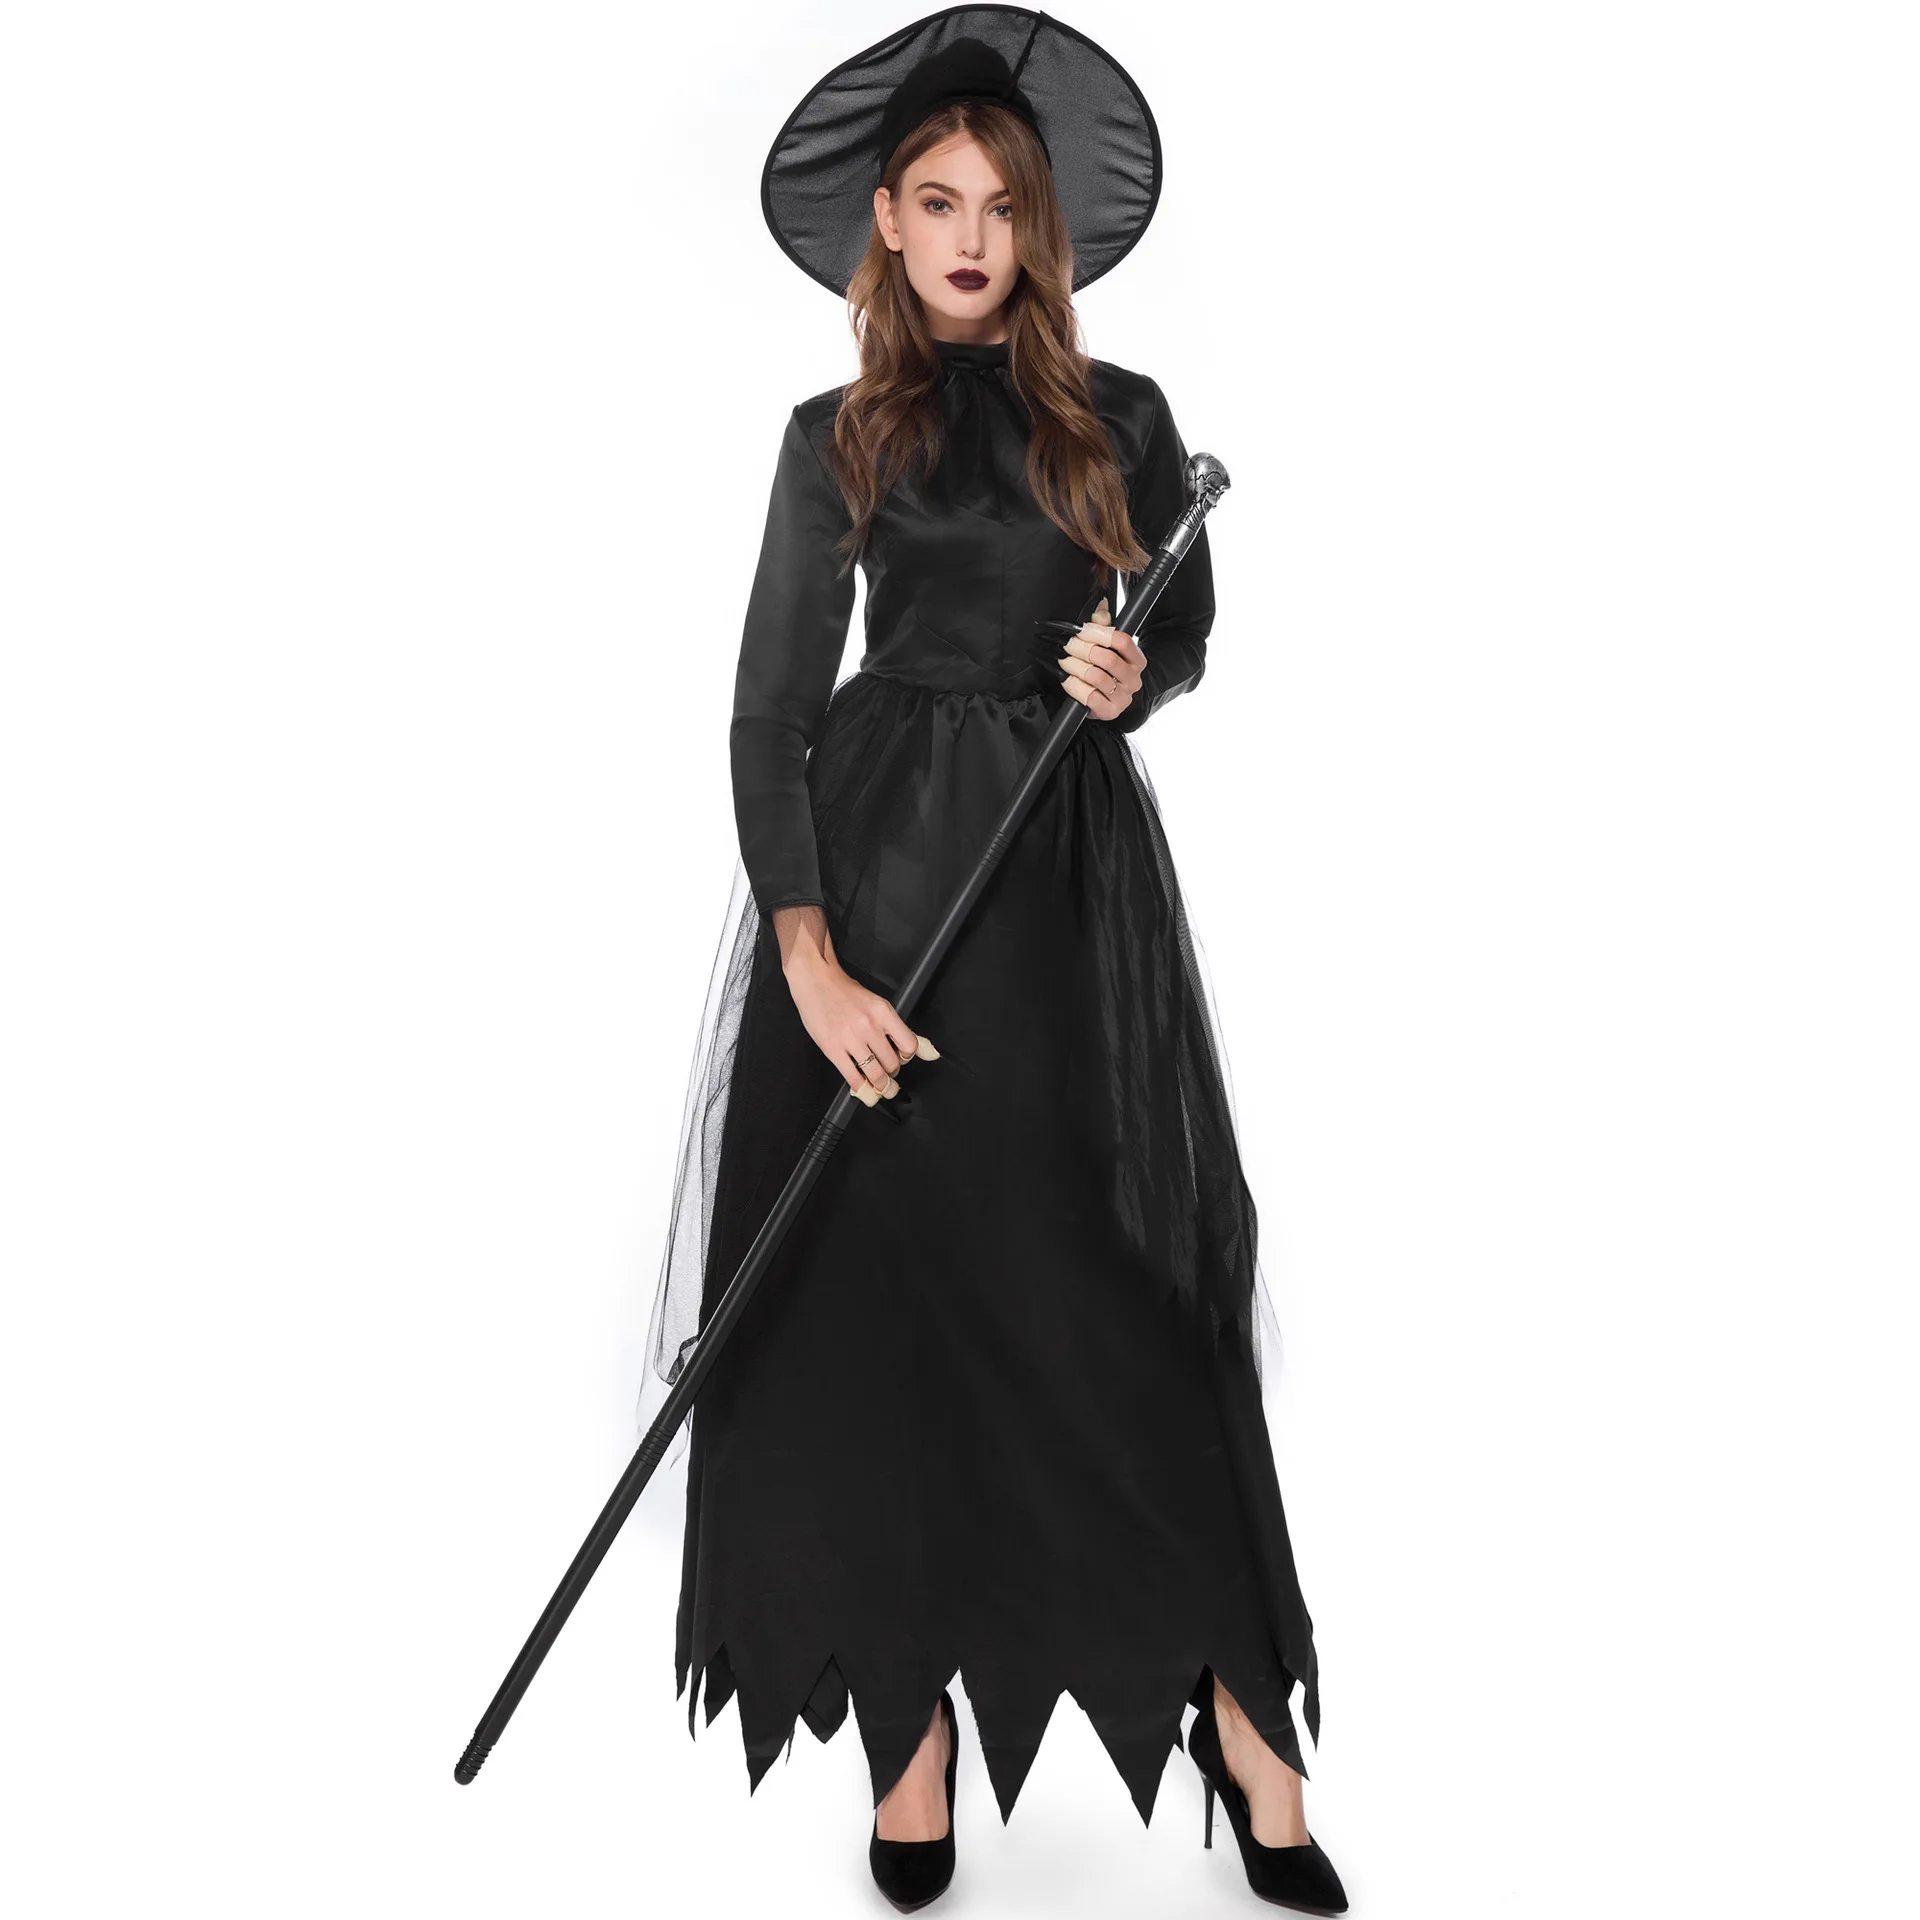 

Women's Carnival Party Fancy Dress Halloween Witch Vampire Cosplay Costume Pointed Hat Outfit Women's Dress Up Drama Masquerade